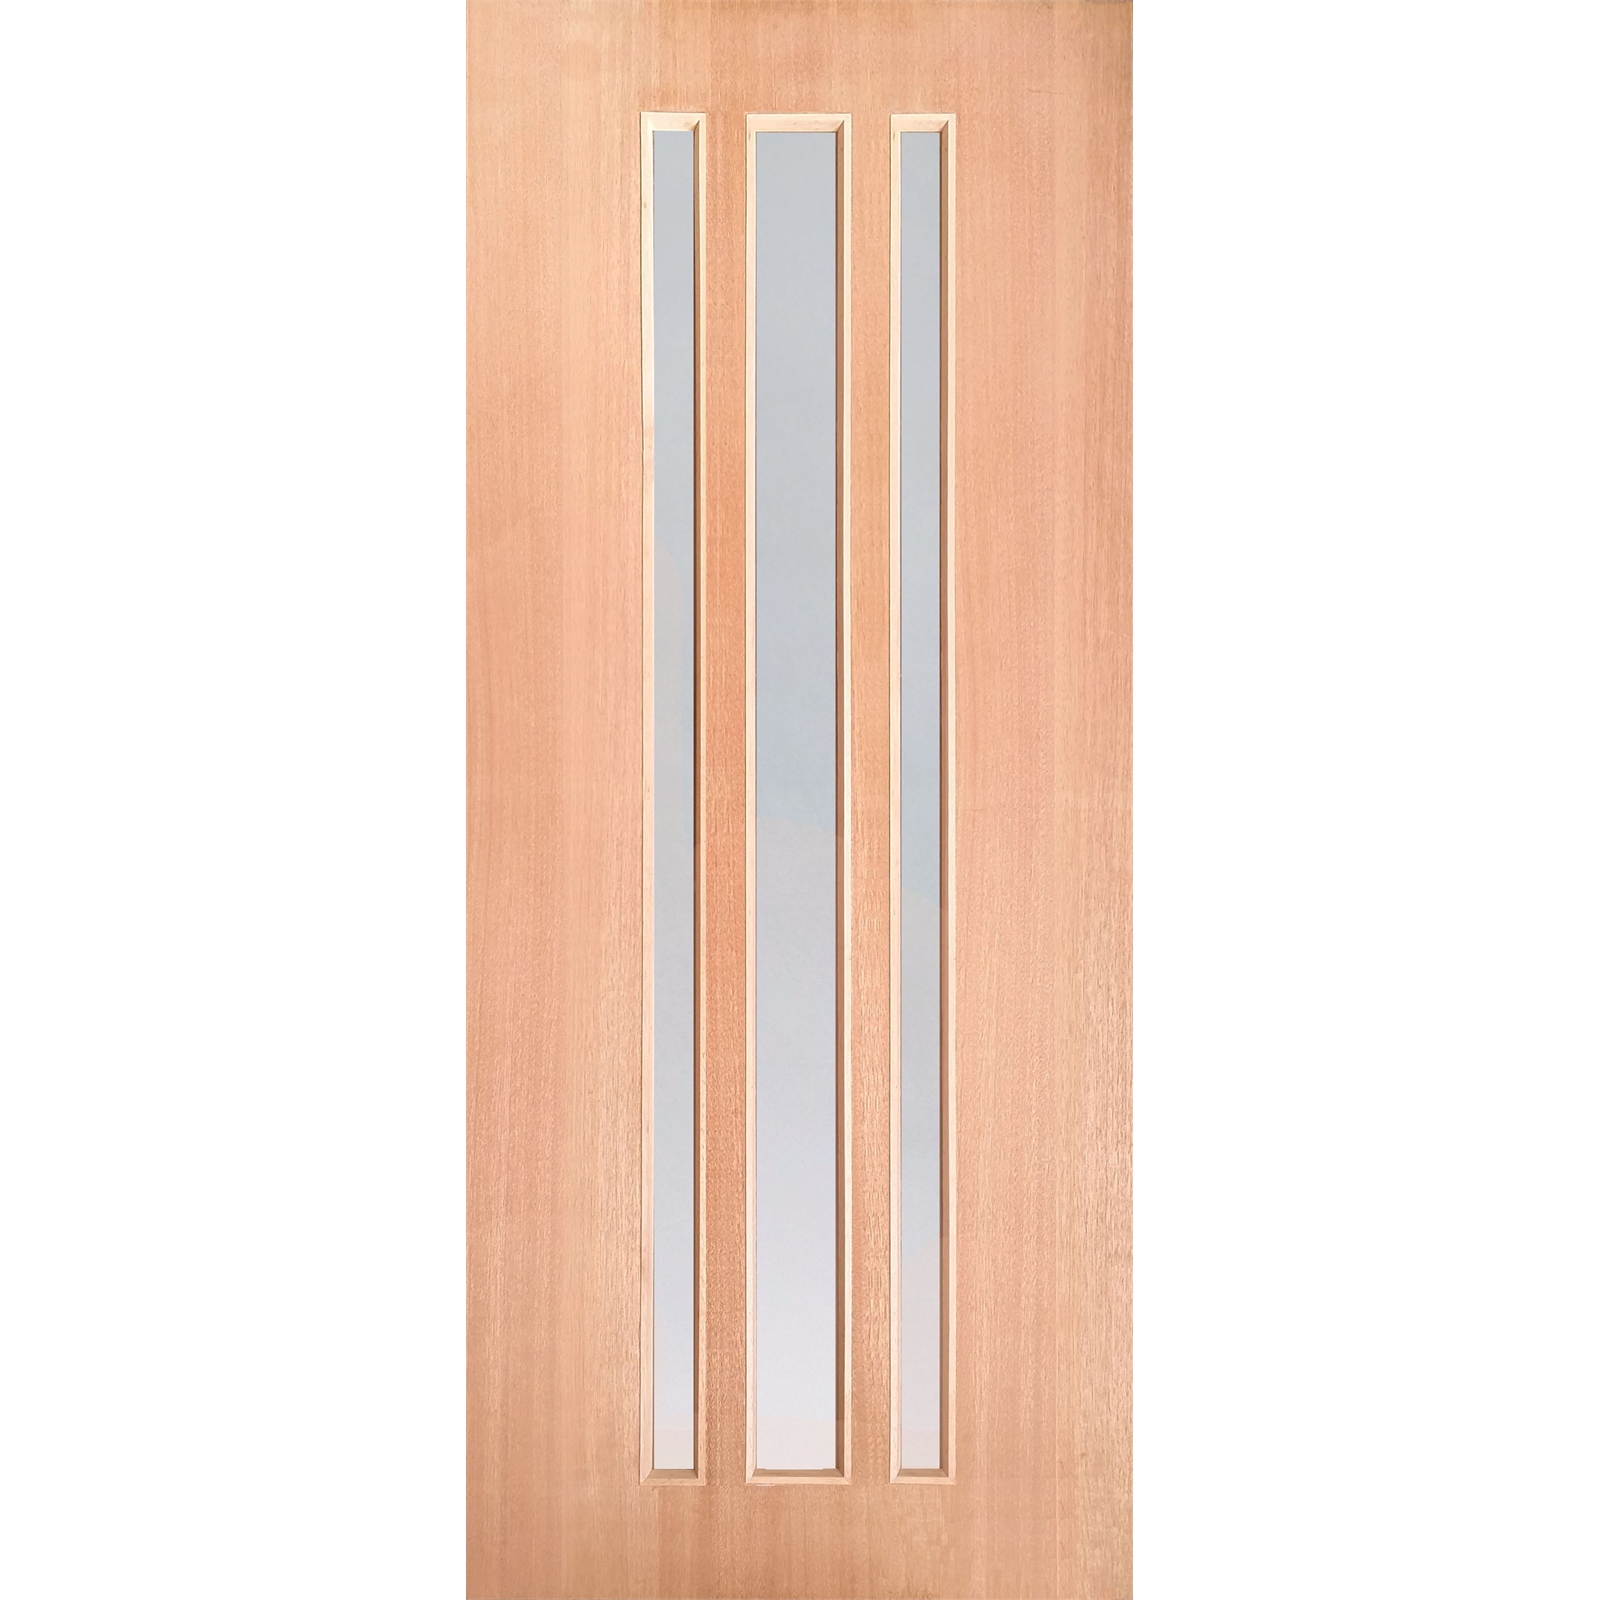 Woodcraft Doors 2040 x 820 x 40mm St Clair SD21 Entrance Door With Frosted Safety Glass